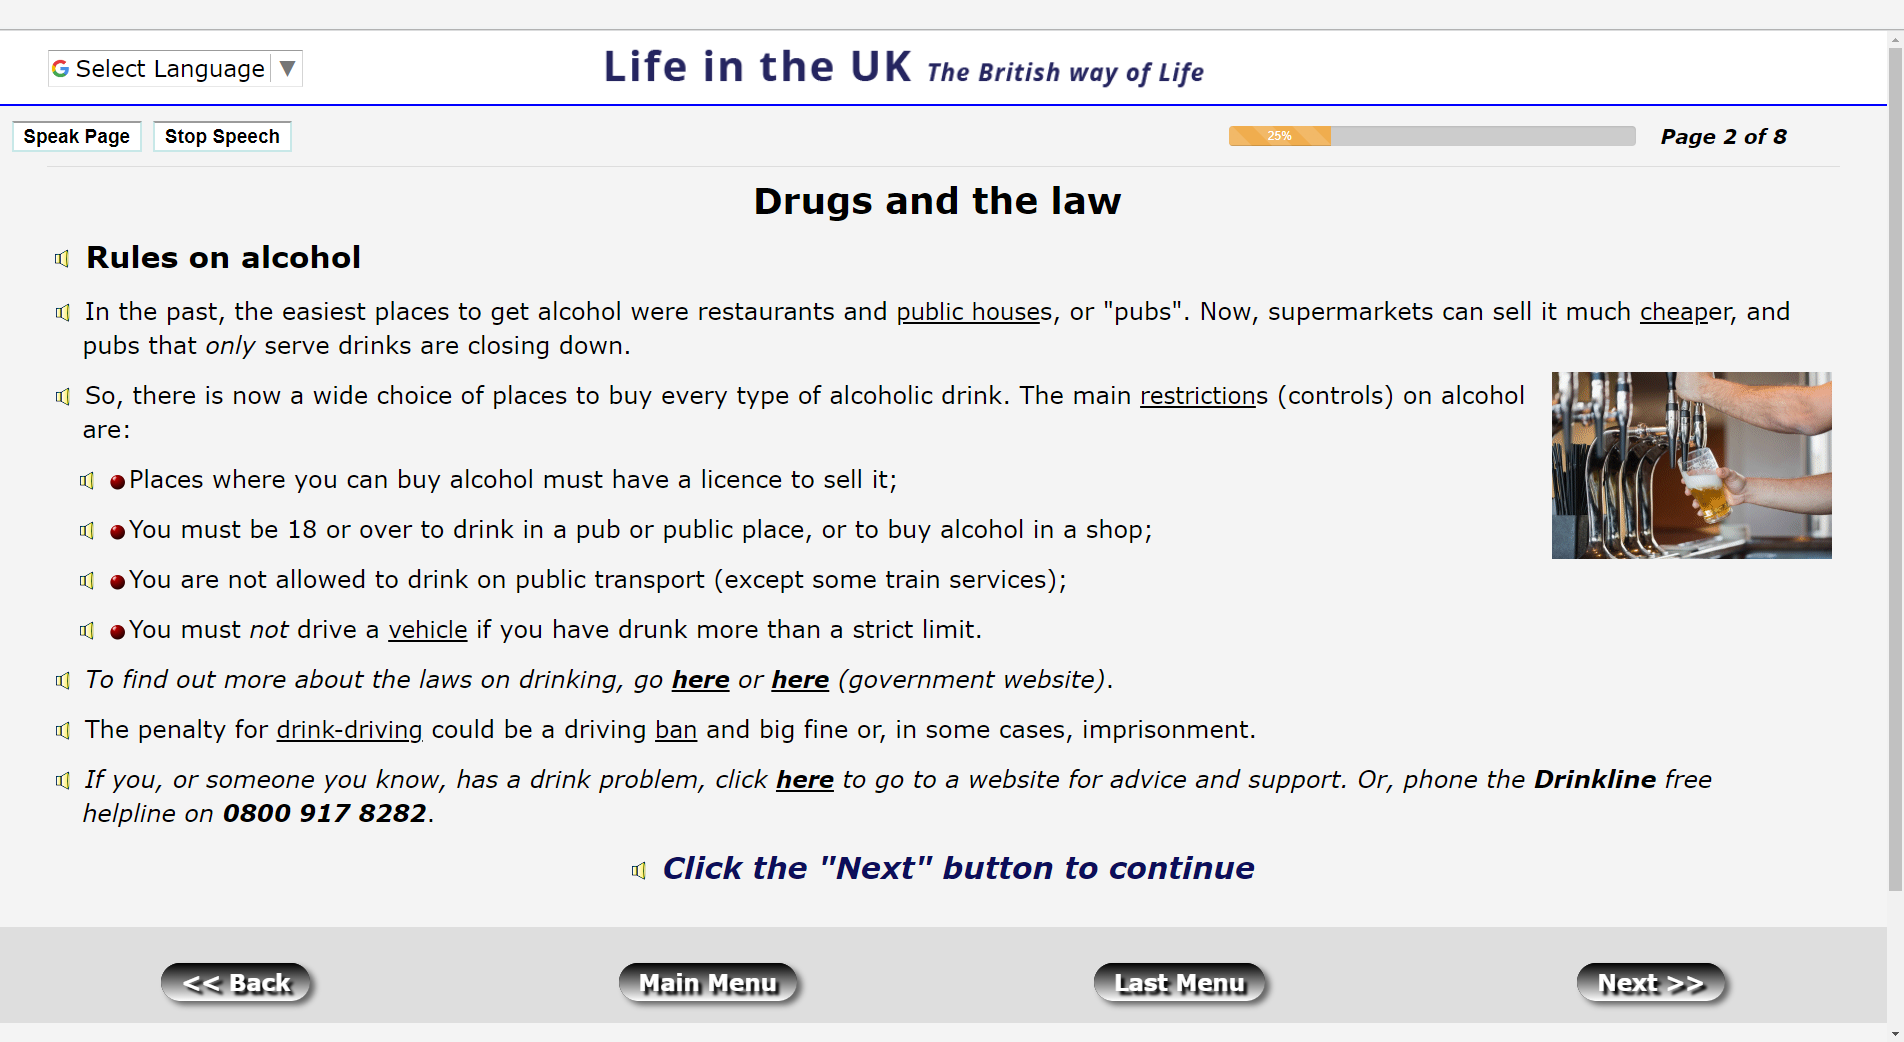 Life in the UK - Safe and legal Page 5